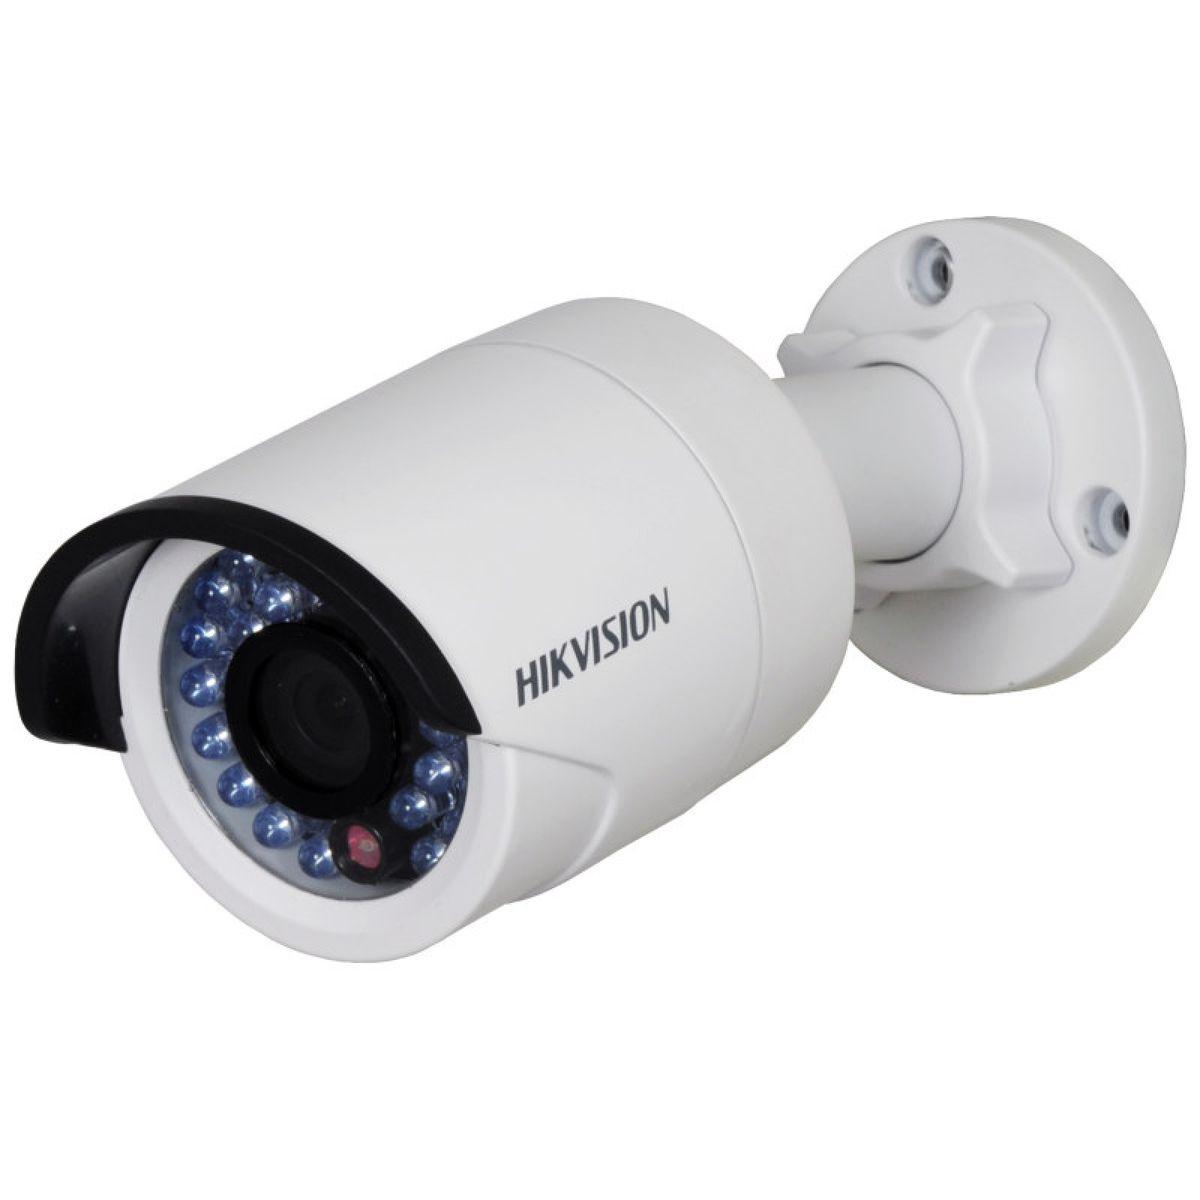 HIKVISION 2MP BULLET CAMERA DS-2CE16DOT-IPF 3.6 - NeonSales South Africa